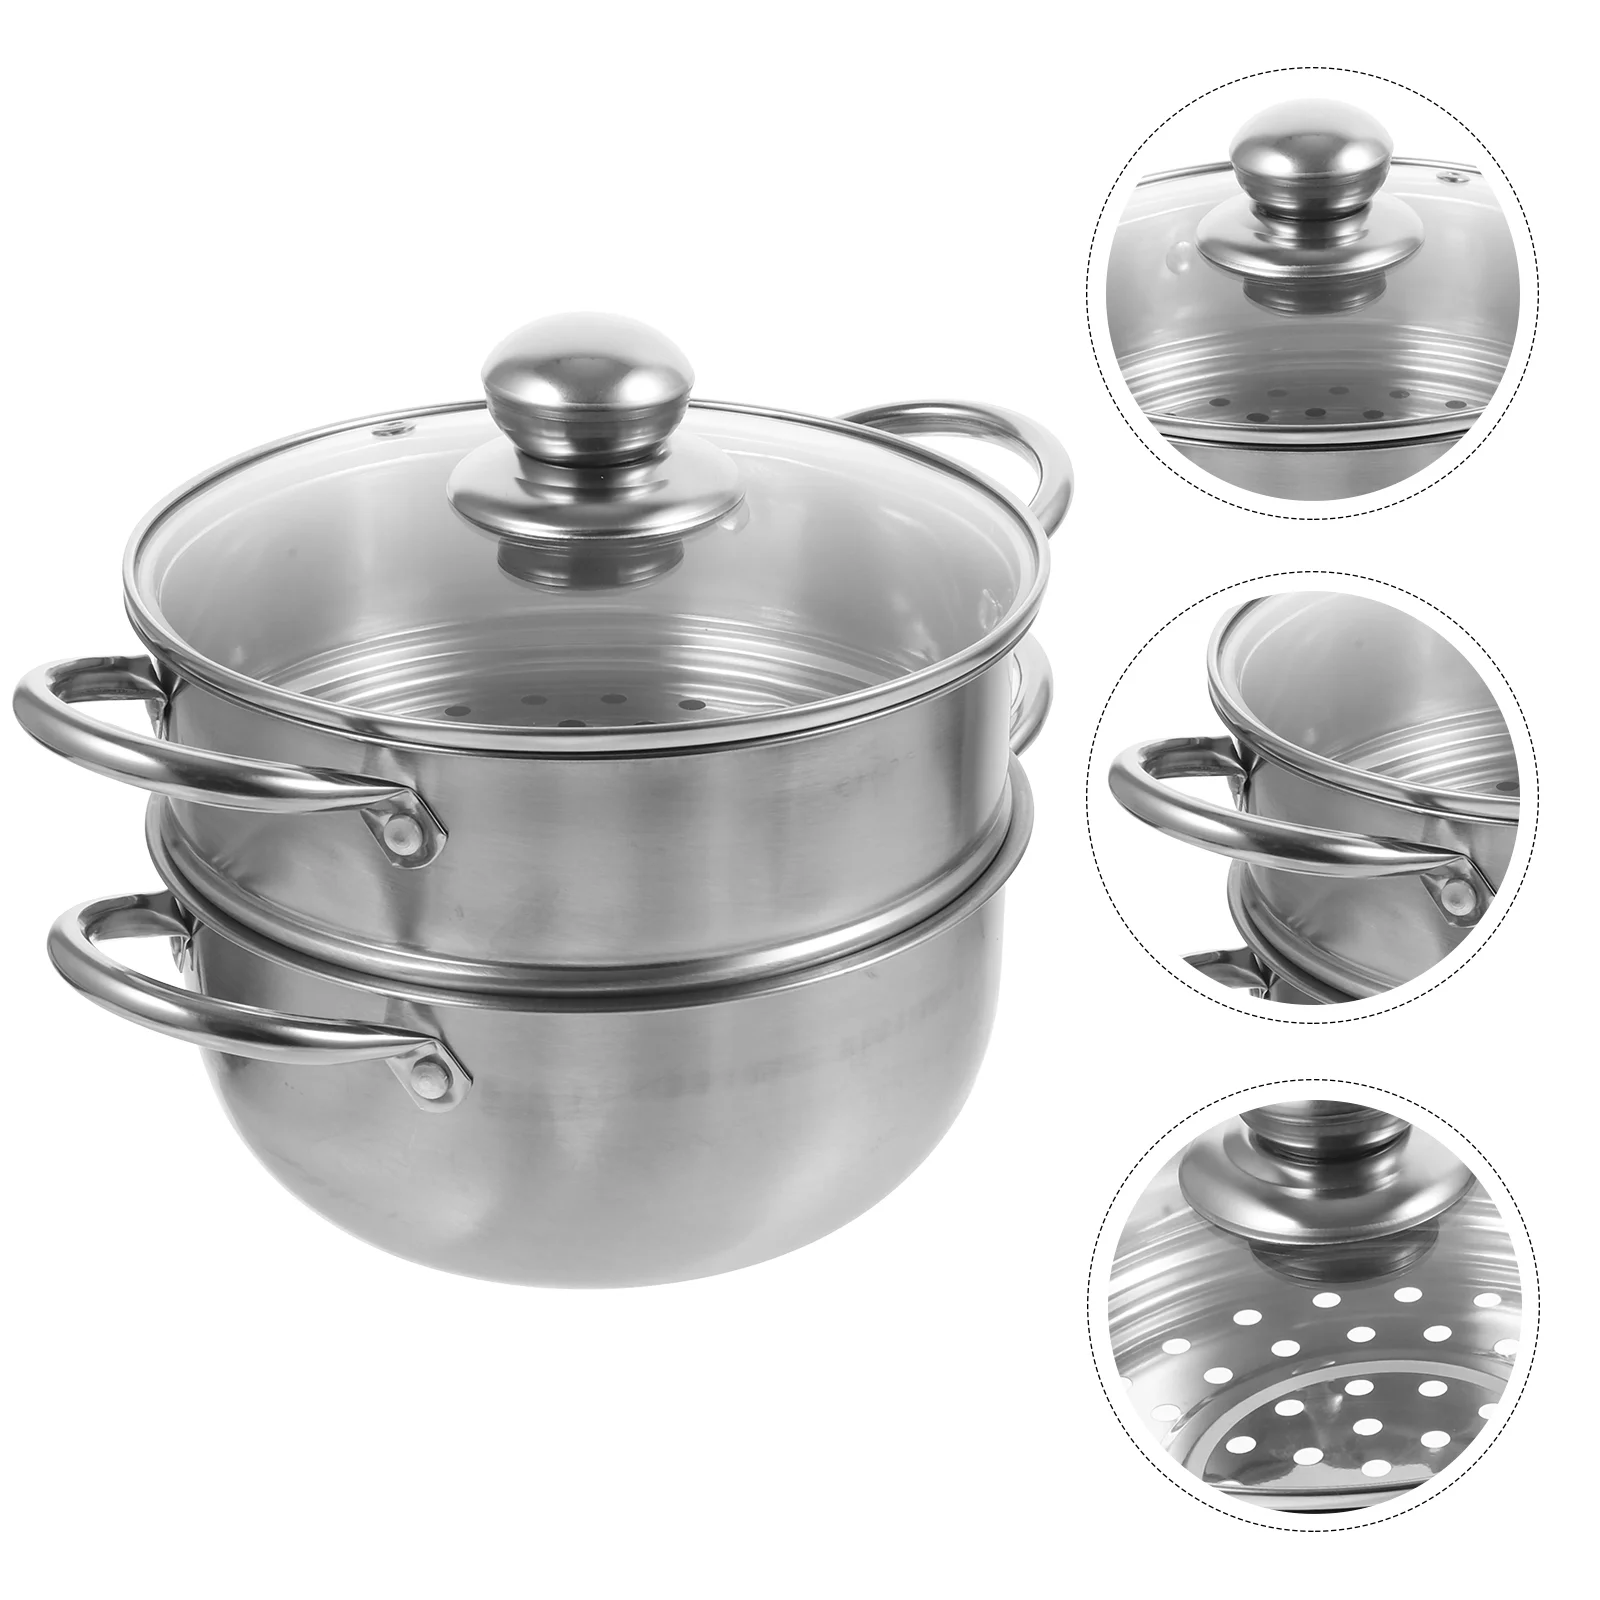 

Pots Cooking Stockpot Soup Pot Steam Vegetable Stainless Steel Steamer Cooker Seafood Kitchen Cookware Induction Steaming Stock